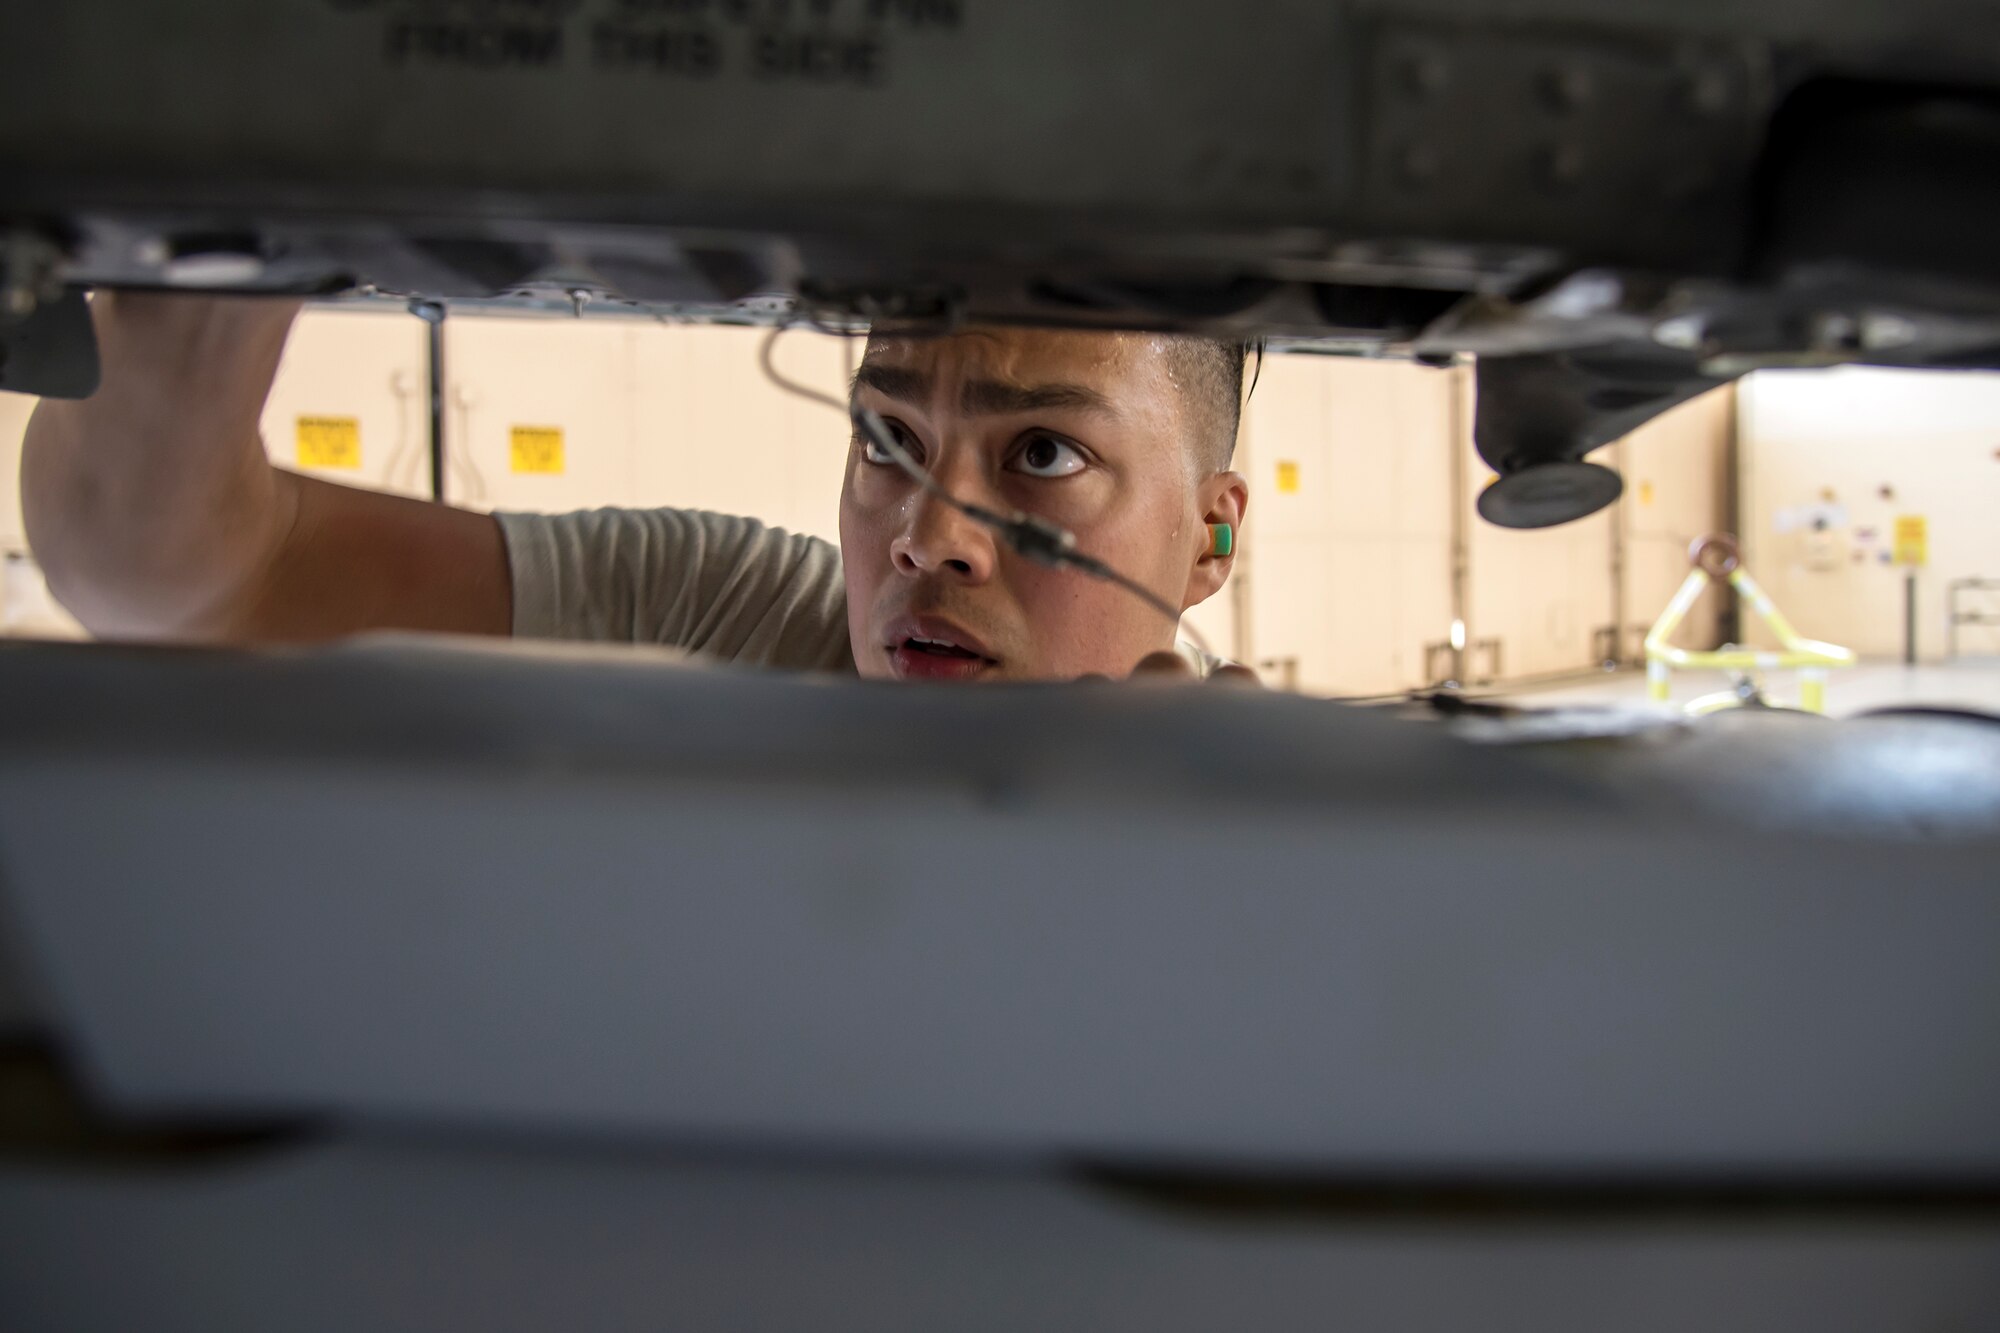 Staff Sgt. Jorge Galvez, 74th Aircraft Maintenance Unit (AMU) weapons load crew team chief, inspects the alignment of an inert MK-84 general purpose bomb during a weapons-load competition, April 6, 2018, at Moody Air Force Base, Ga. During the load portion of the competition Airmen from the 74th and 75th AMU were assessed on their ability to quickly and efficiently load munitions onto an A-10. They were also judged on dress and appearance and a written test based on munitions knowledge. (U.S. Air Force photo by Airman Eugene Oliver)